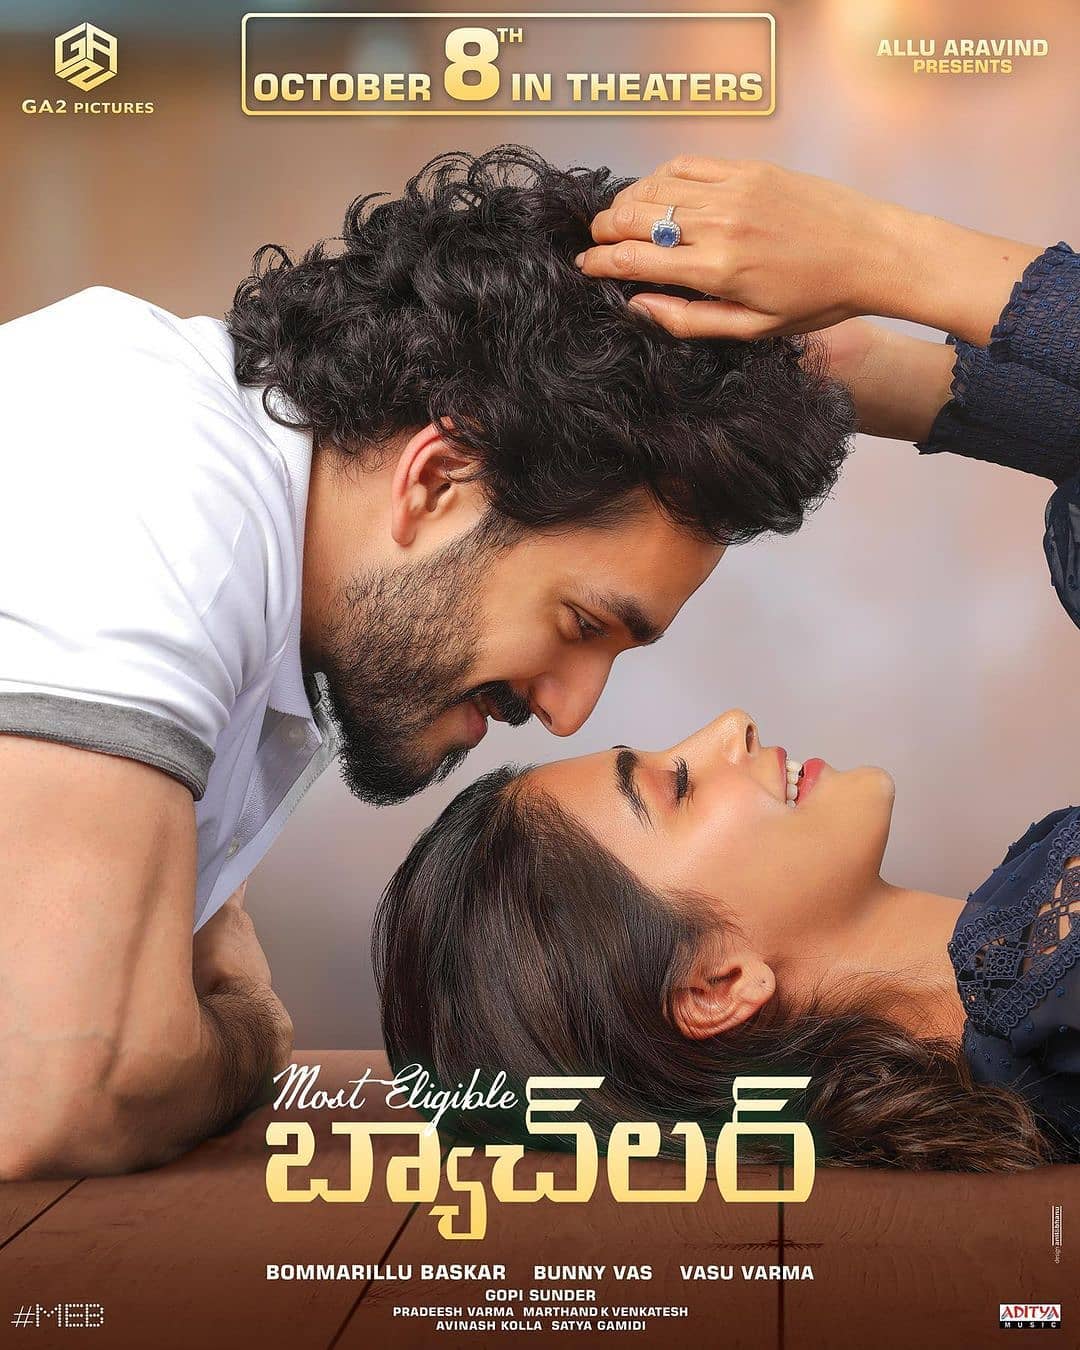 Akhil Akkineni and Pooja Hegde in ‘Most Eligible Bachelor’ movie poster